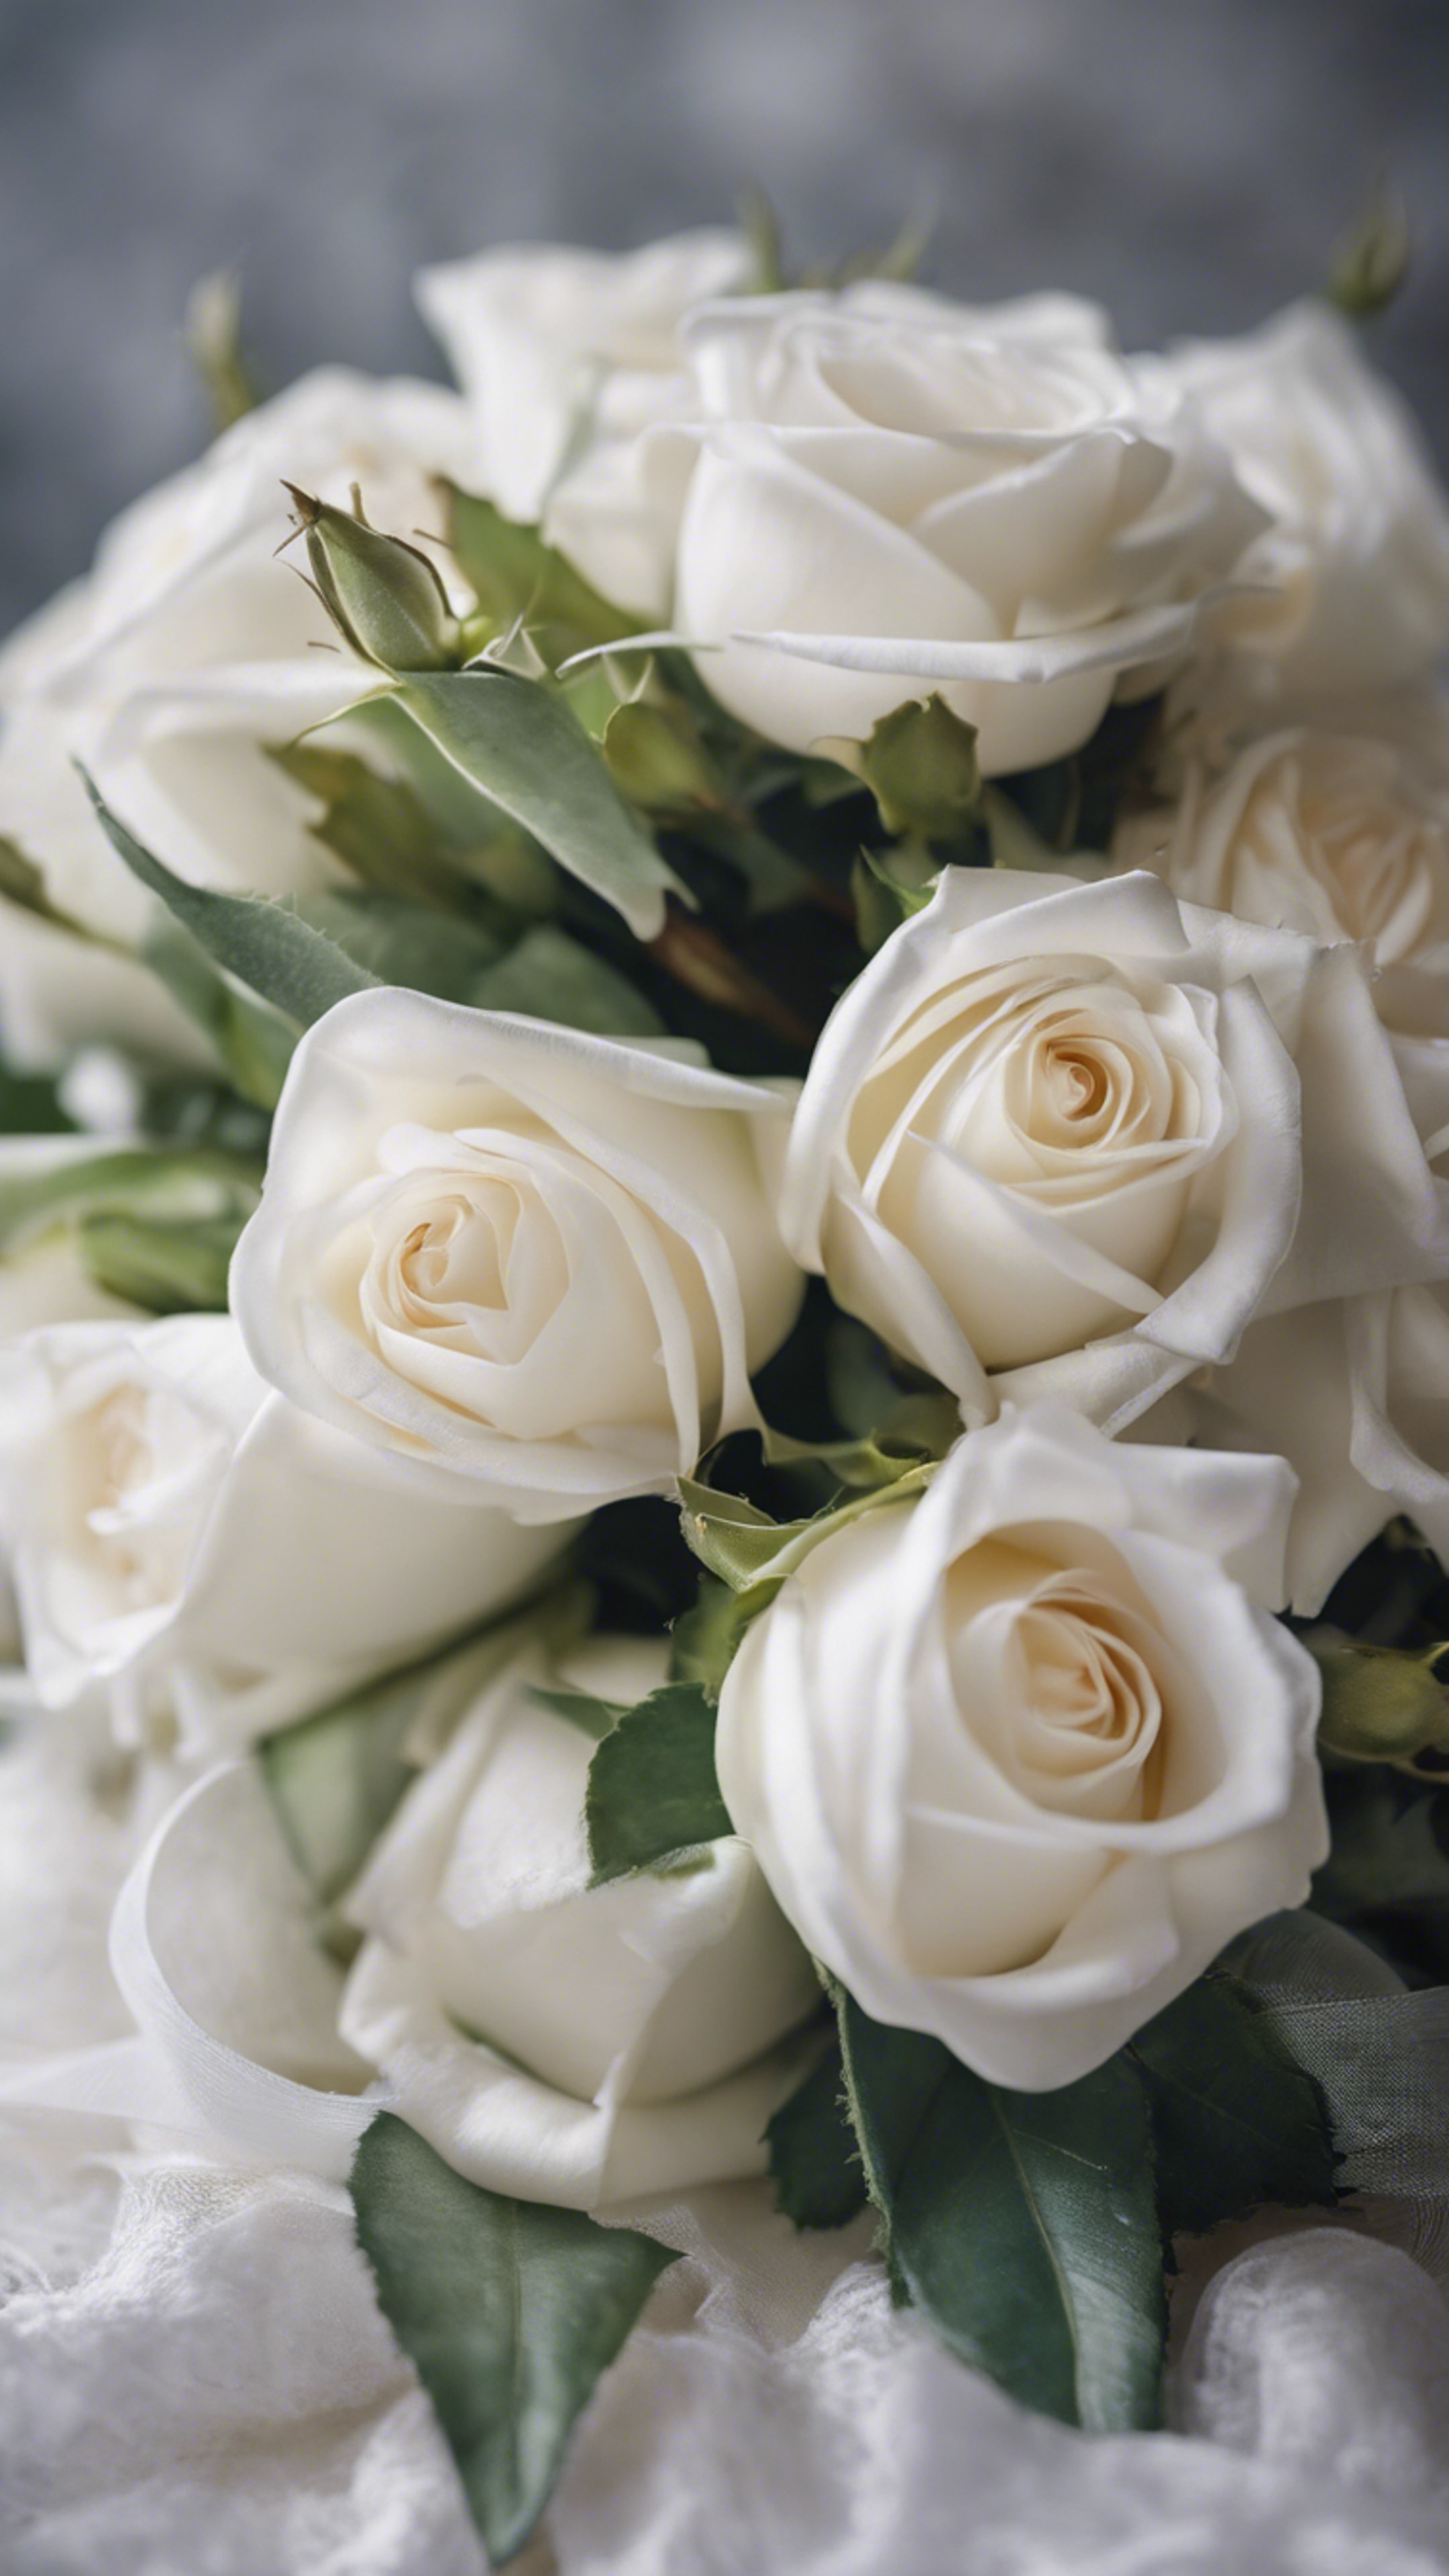 A bouquet of white roses wrapped in sheer white satin ribbon. Tapeta[5223d8c249ea42cfaf4b]